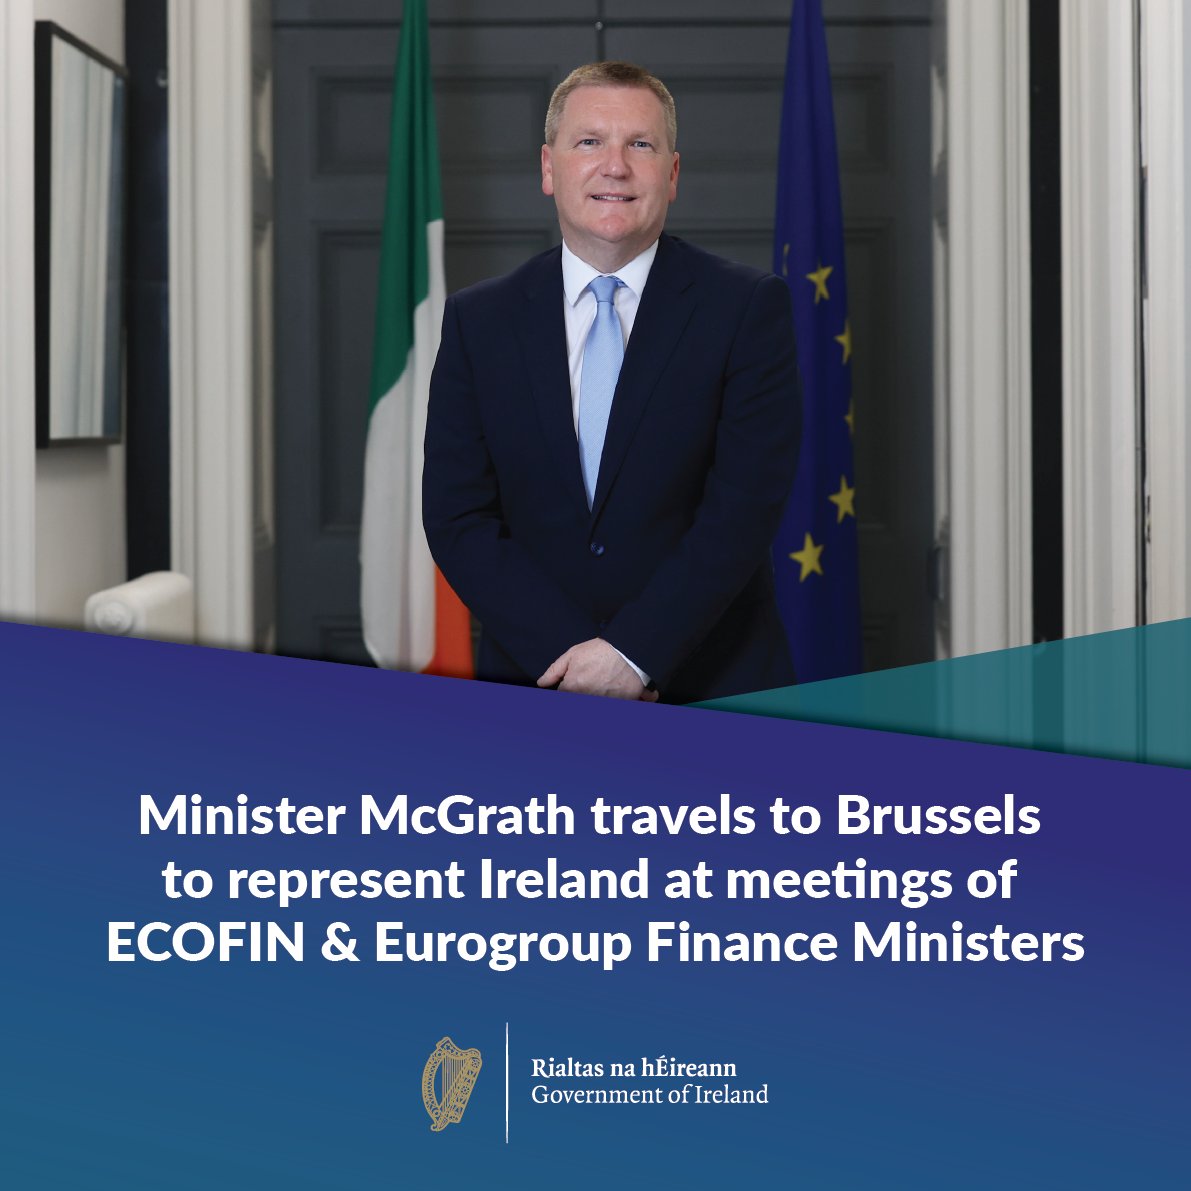 Minister @mmcgrathtd has today travelled to Brussels to represent Ireland at meetings of ECOFIN and Eurogroup Finance Ministers. Read more: gov.ie/en/press-relea…